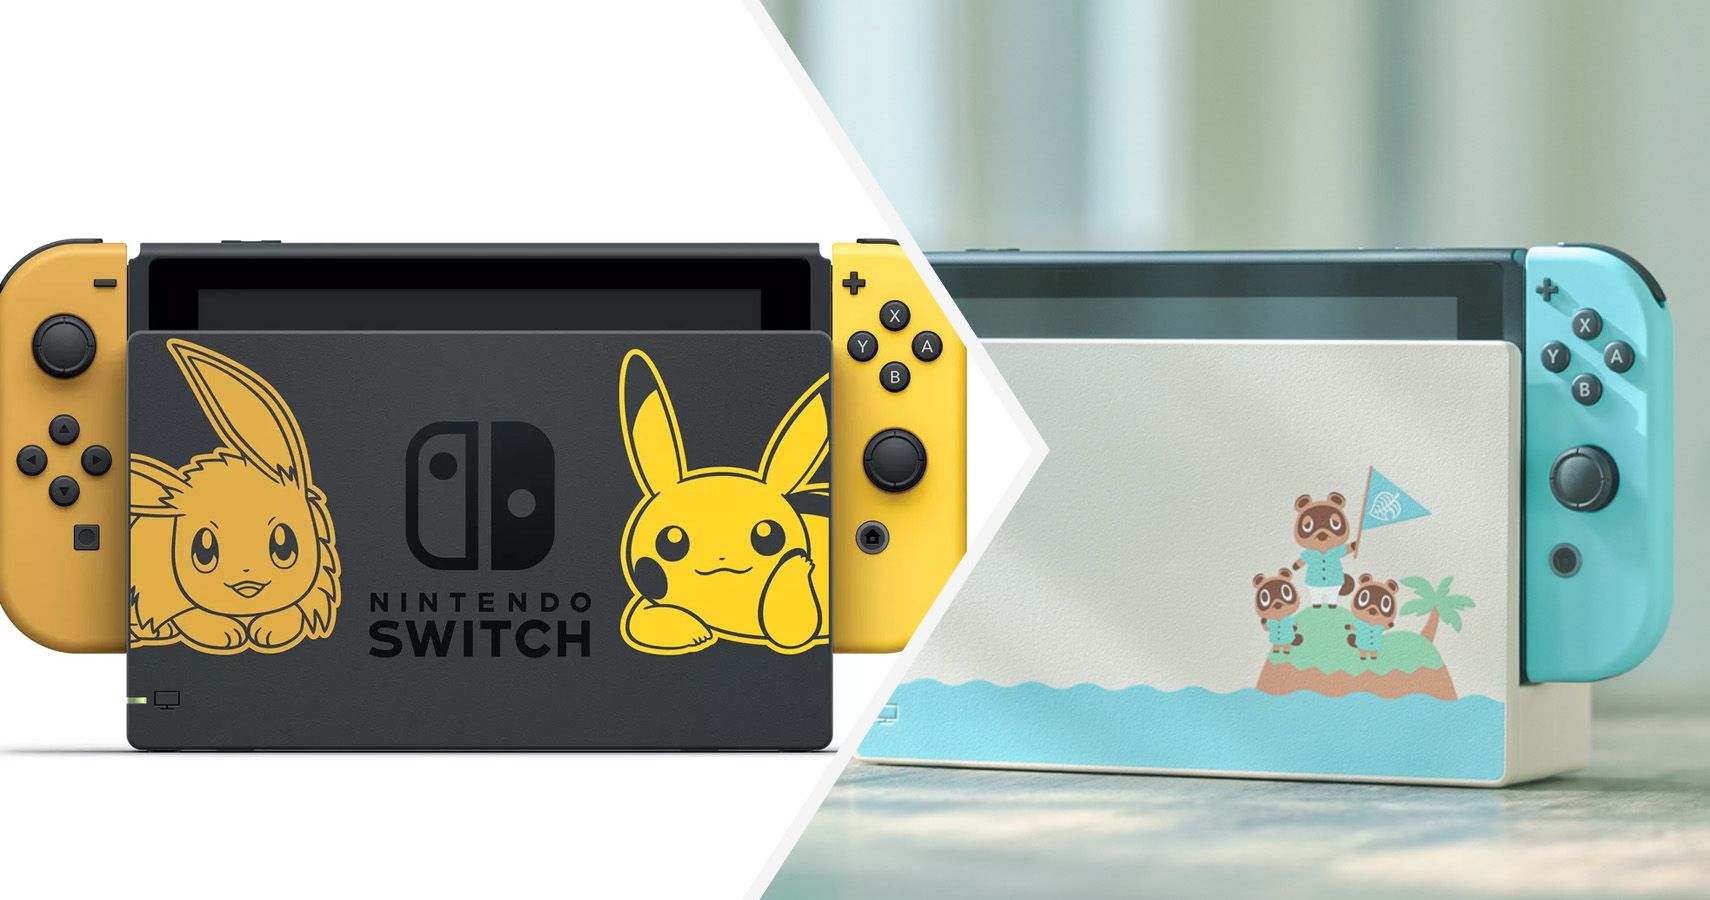 15 Best Limited Edition Nintendo Switch Models Ranked